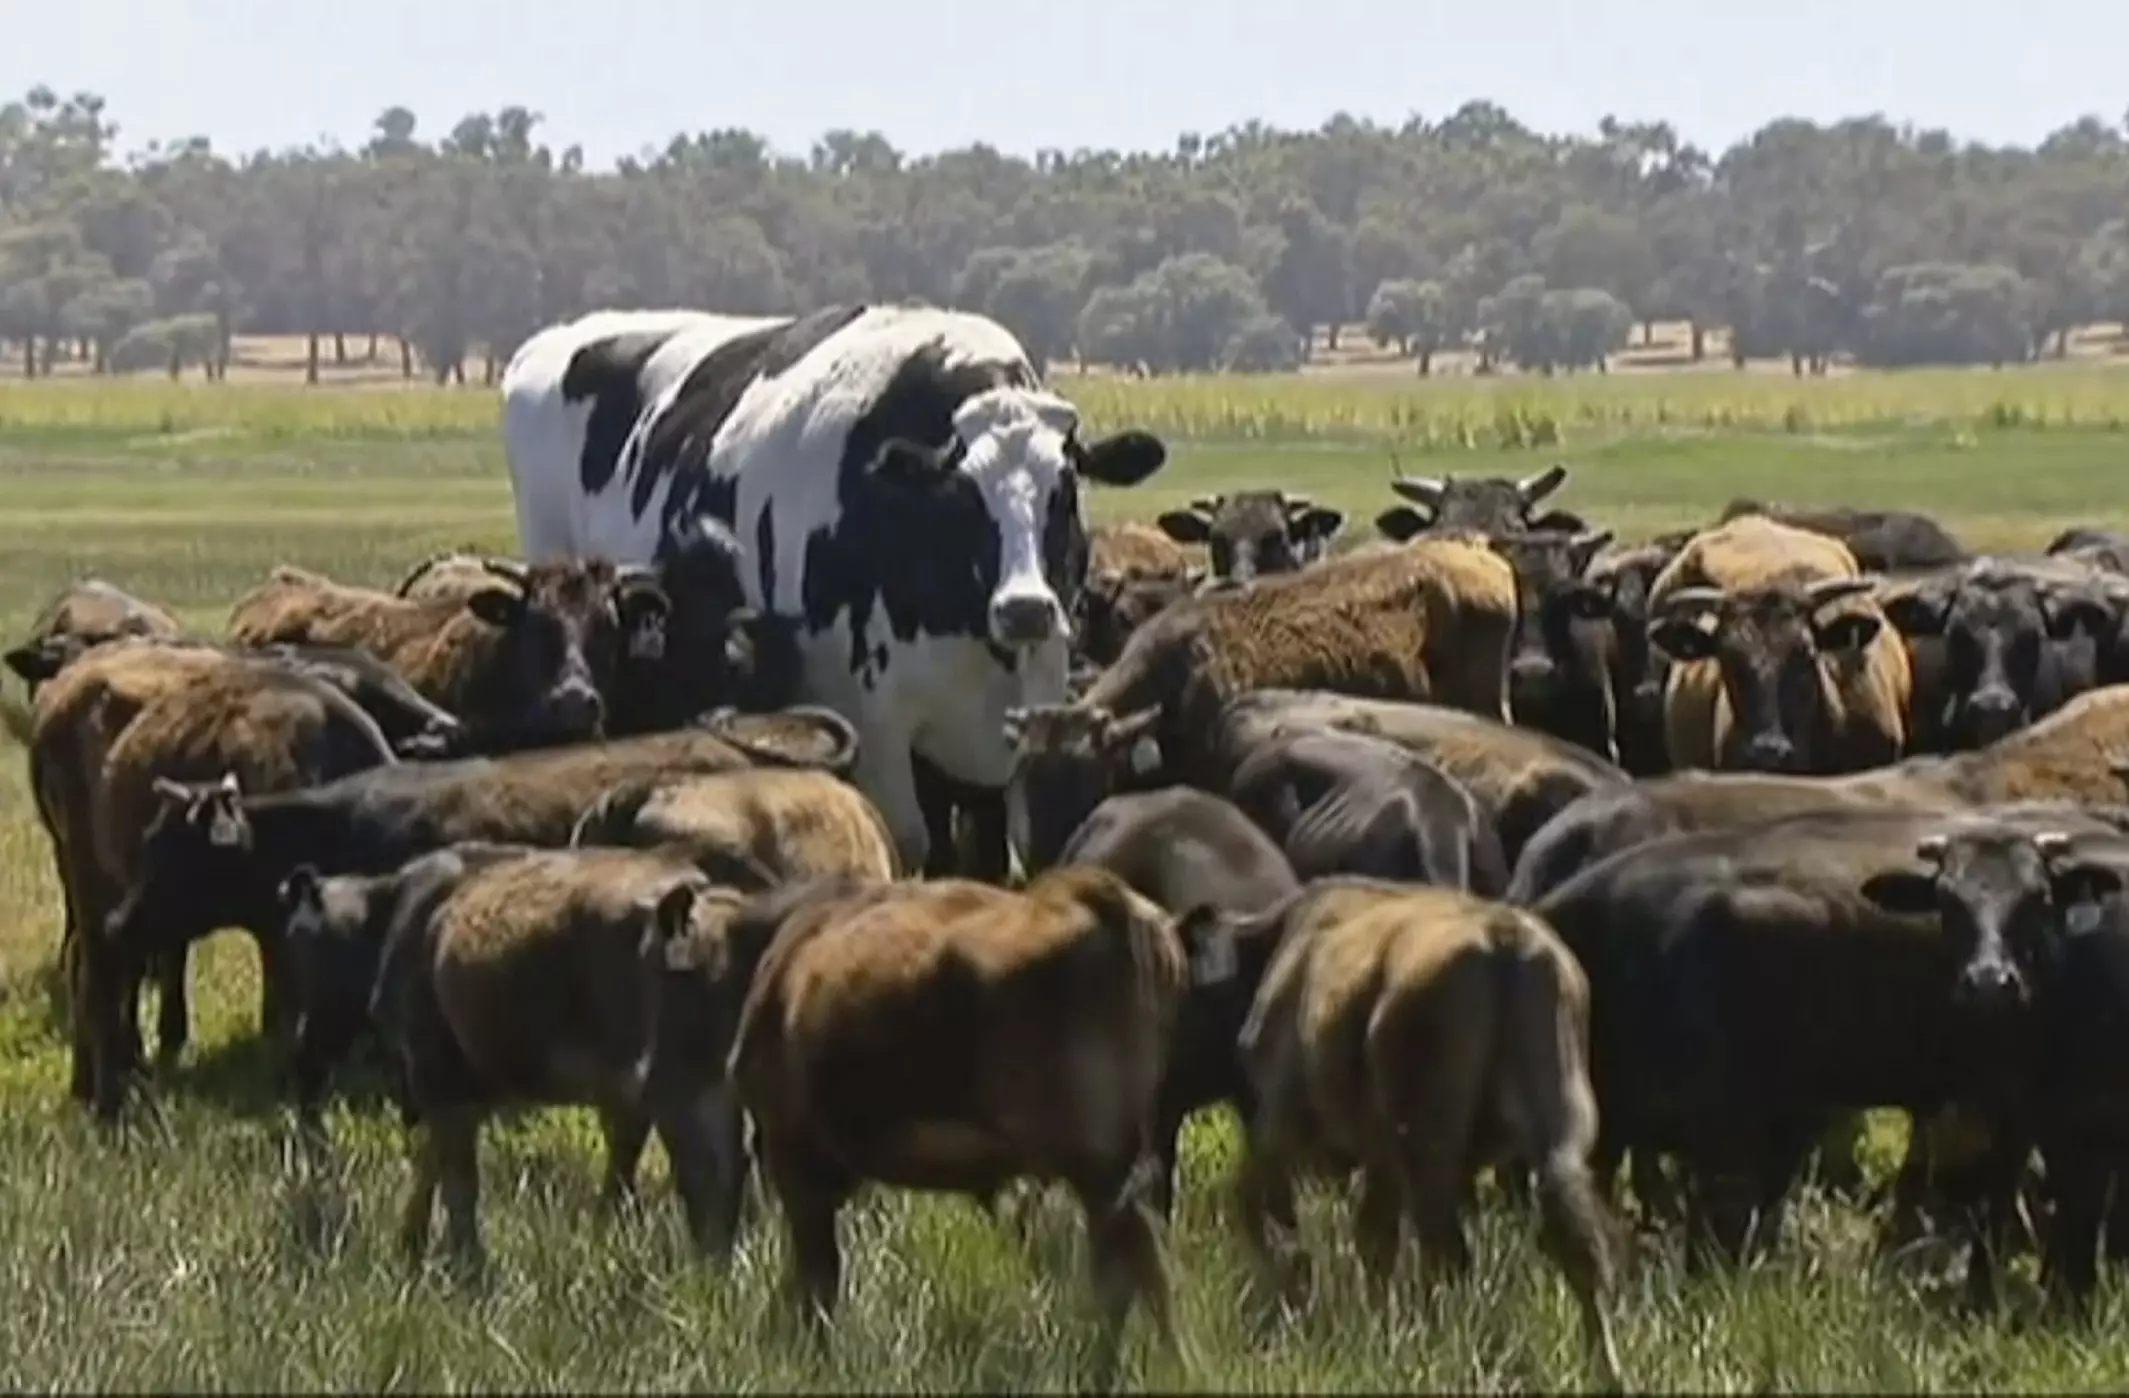 Knickers the gigantic cow - sorry - 'steer'.